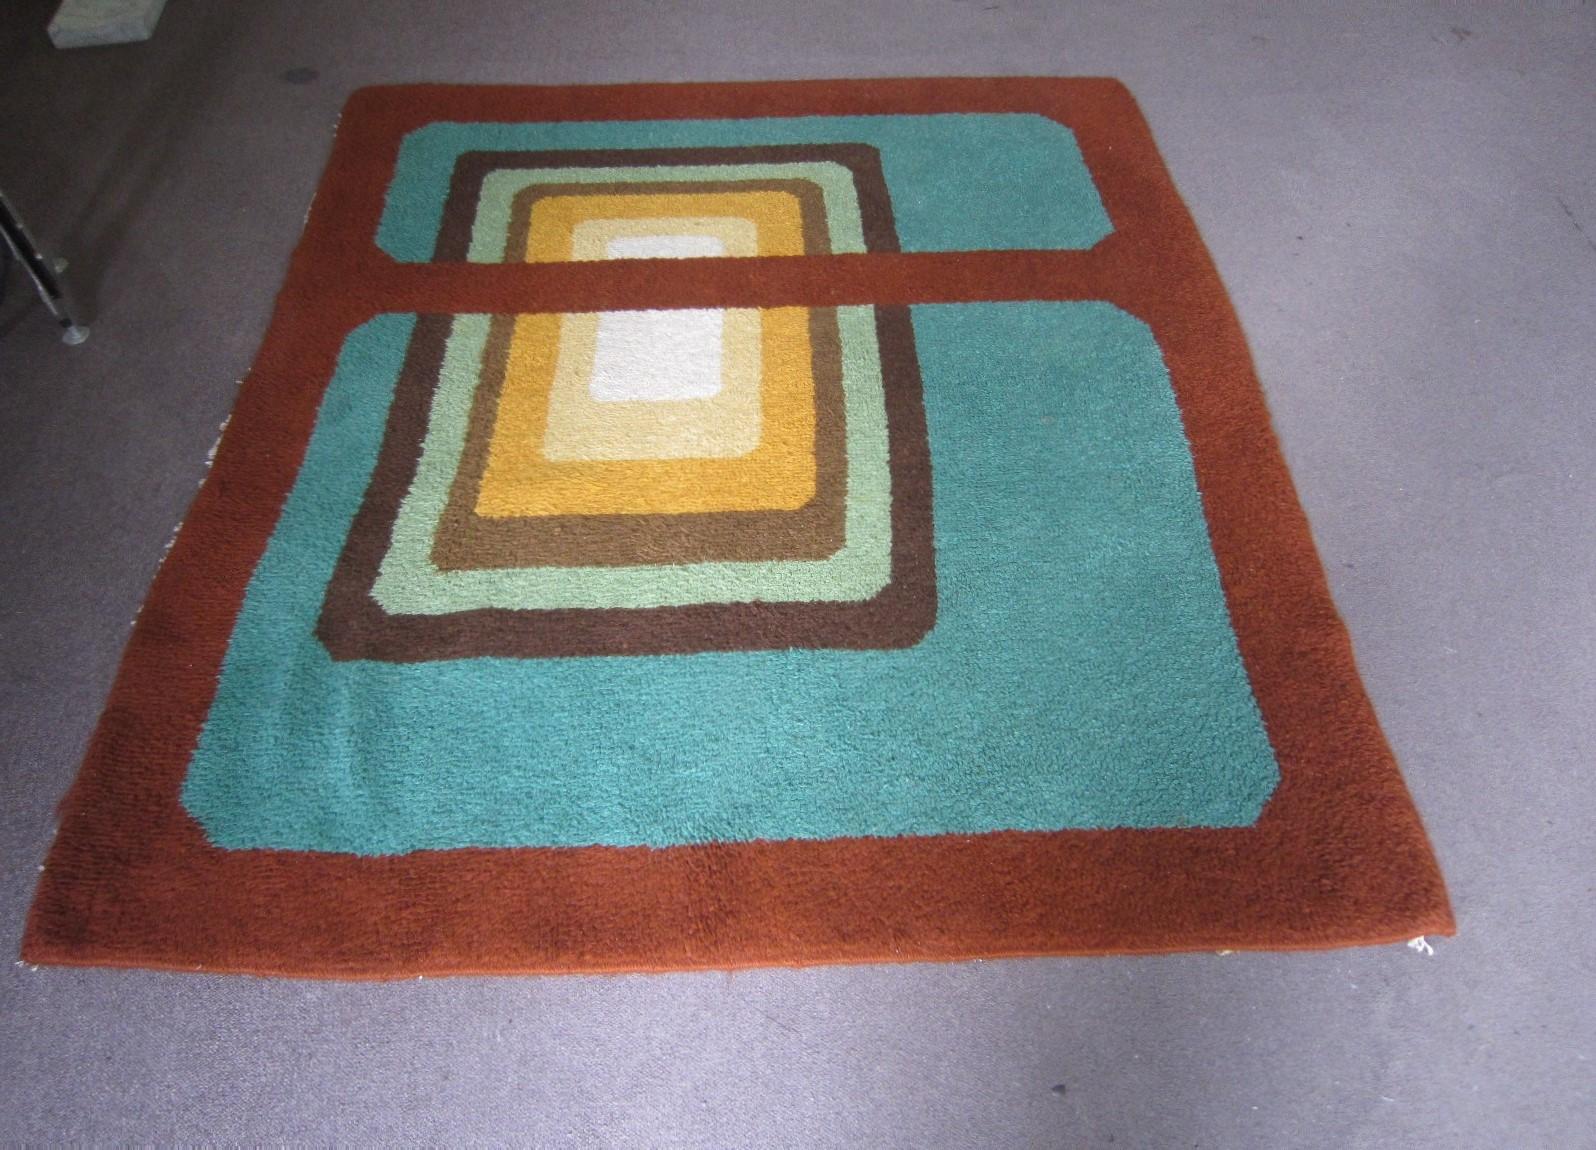 Abstract bold patterned geometric, vintage carpet in colorful shades of russet, greens, ochres, gold, browns.
Square and rectangular overlays and color blocking represented on this Mod design.
This decorative carpet was made when it was still a